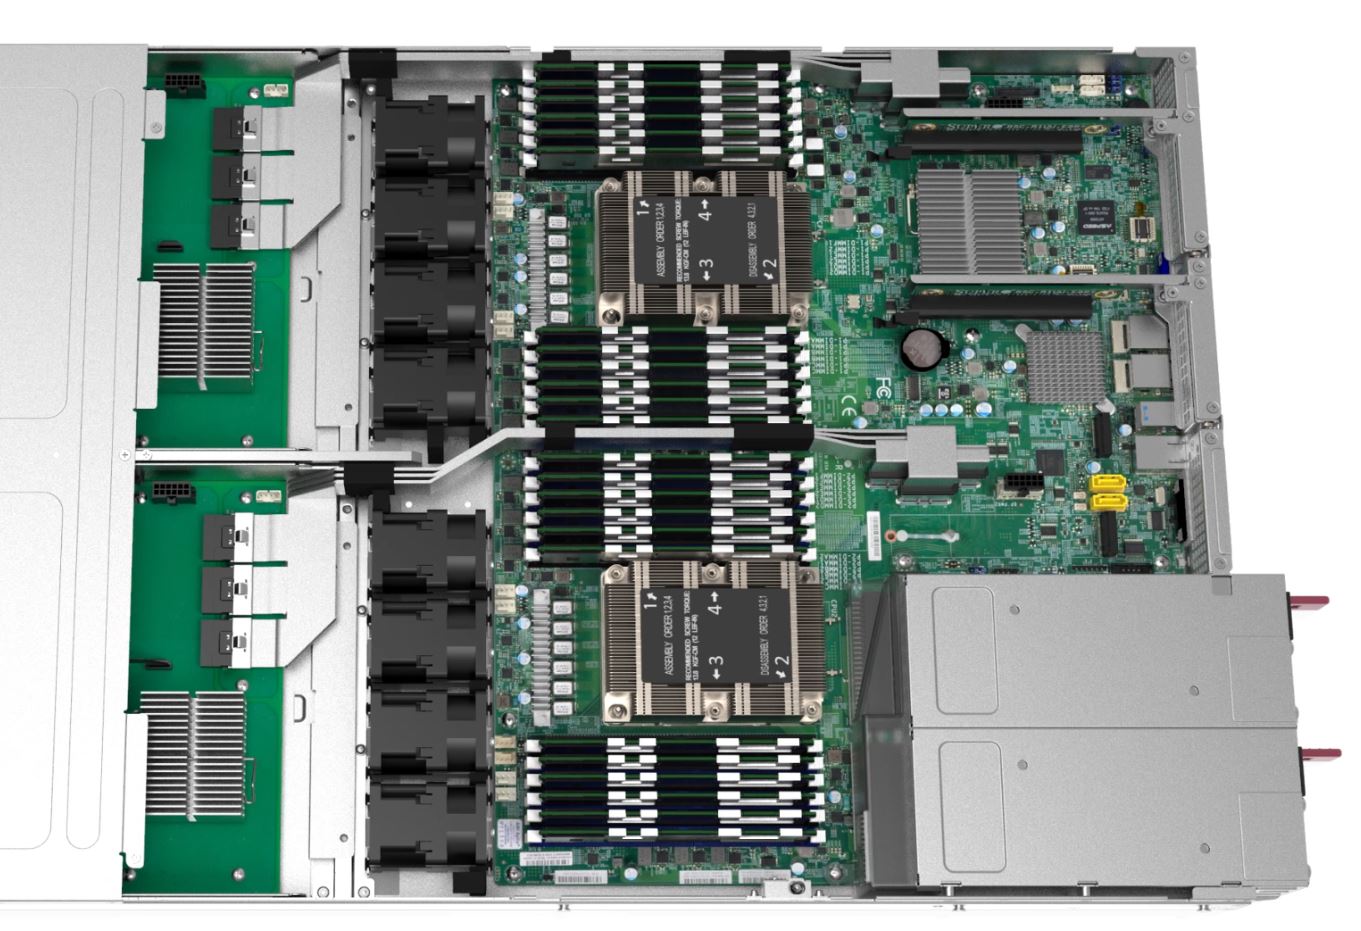 Supermicro SSG 1029P NEL32R Top Motherboard View